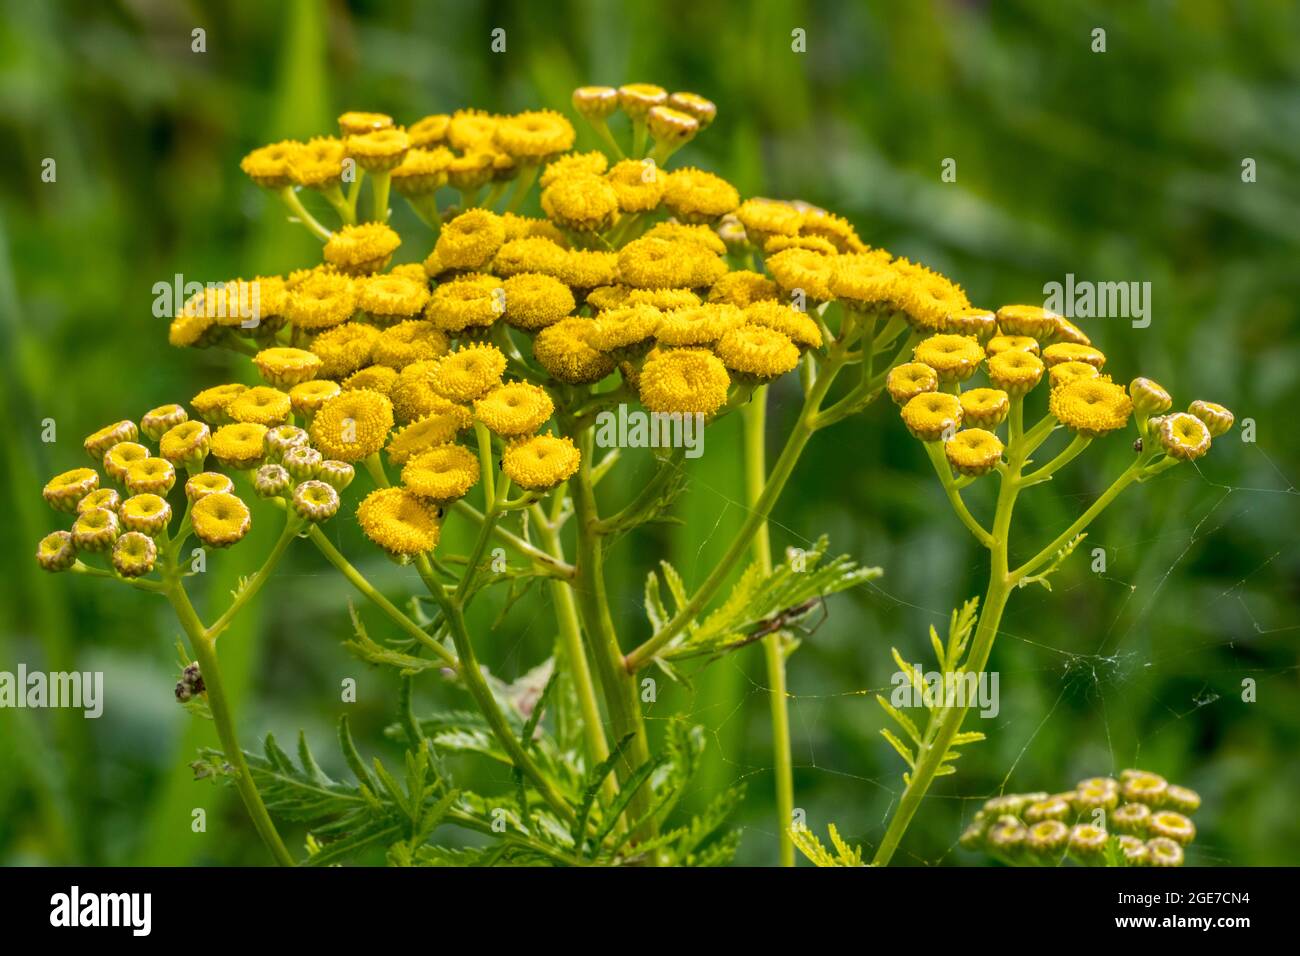 Common tansy / bitter buttons / cow bitter / golden buttons (Tanacetum vulgare / Chrysanthemum vulgare) in flower in summer Stock Photo